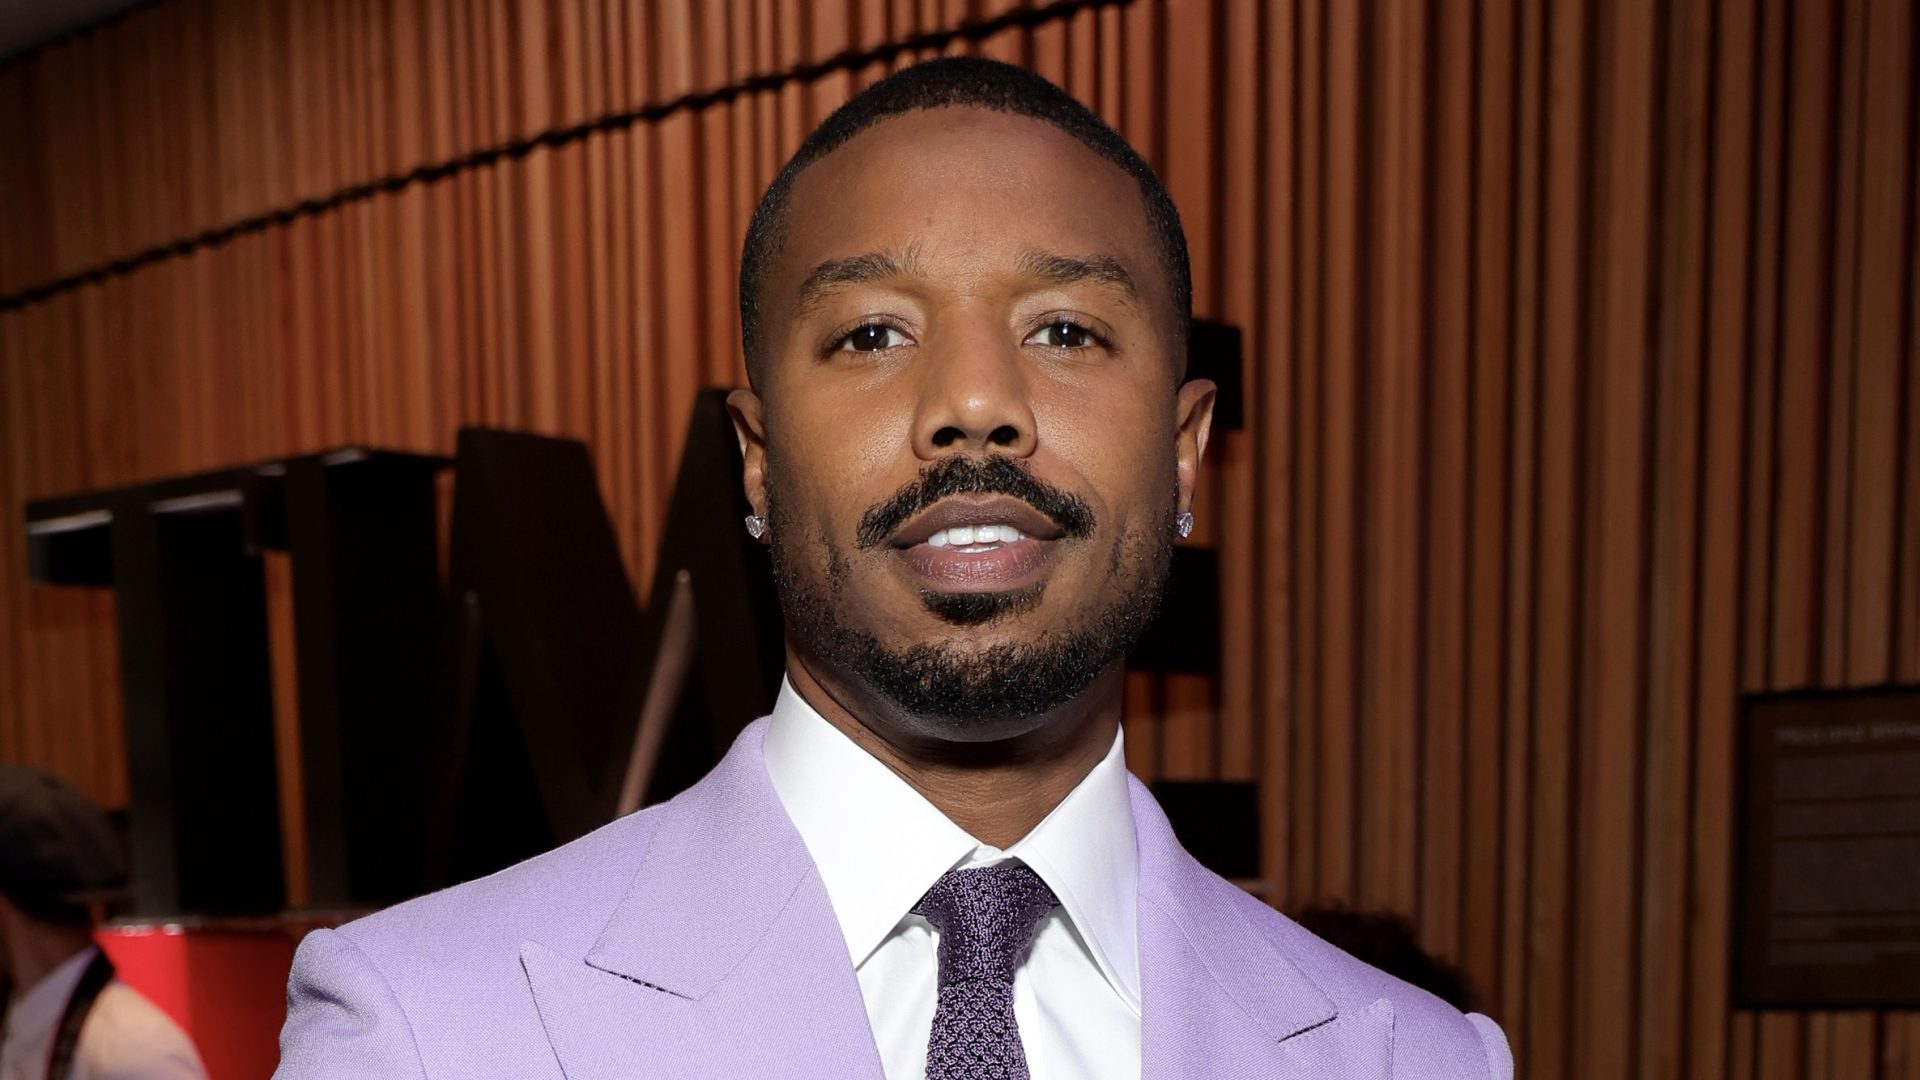 NEW YORK, NEW YORK - APRIL 26: Michael B. Jordan attends the 2023 TIME100 Gala at Jazz at Lincoln Center on April 26, 2023 in New York City.